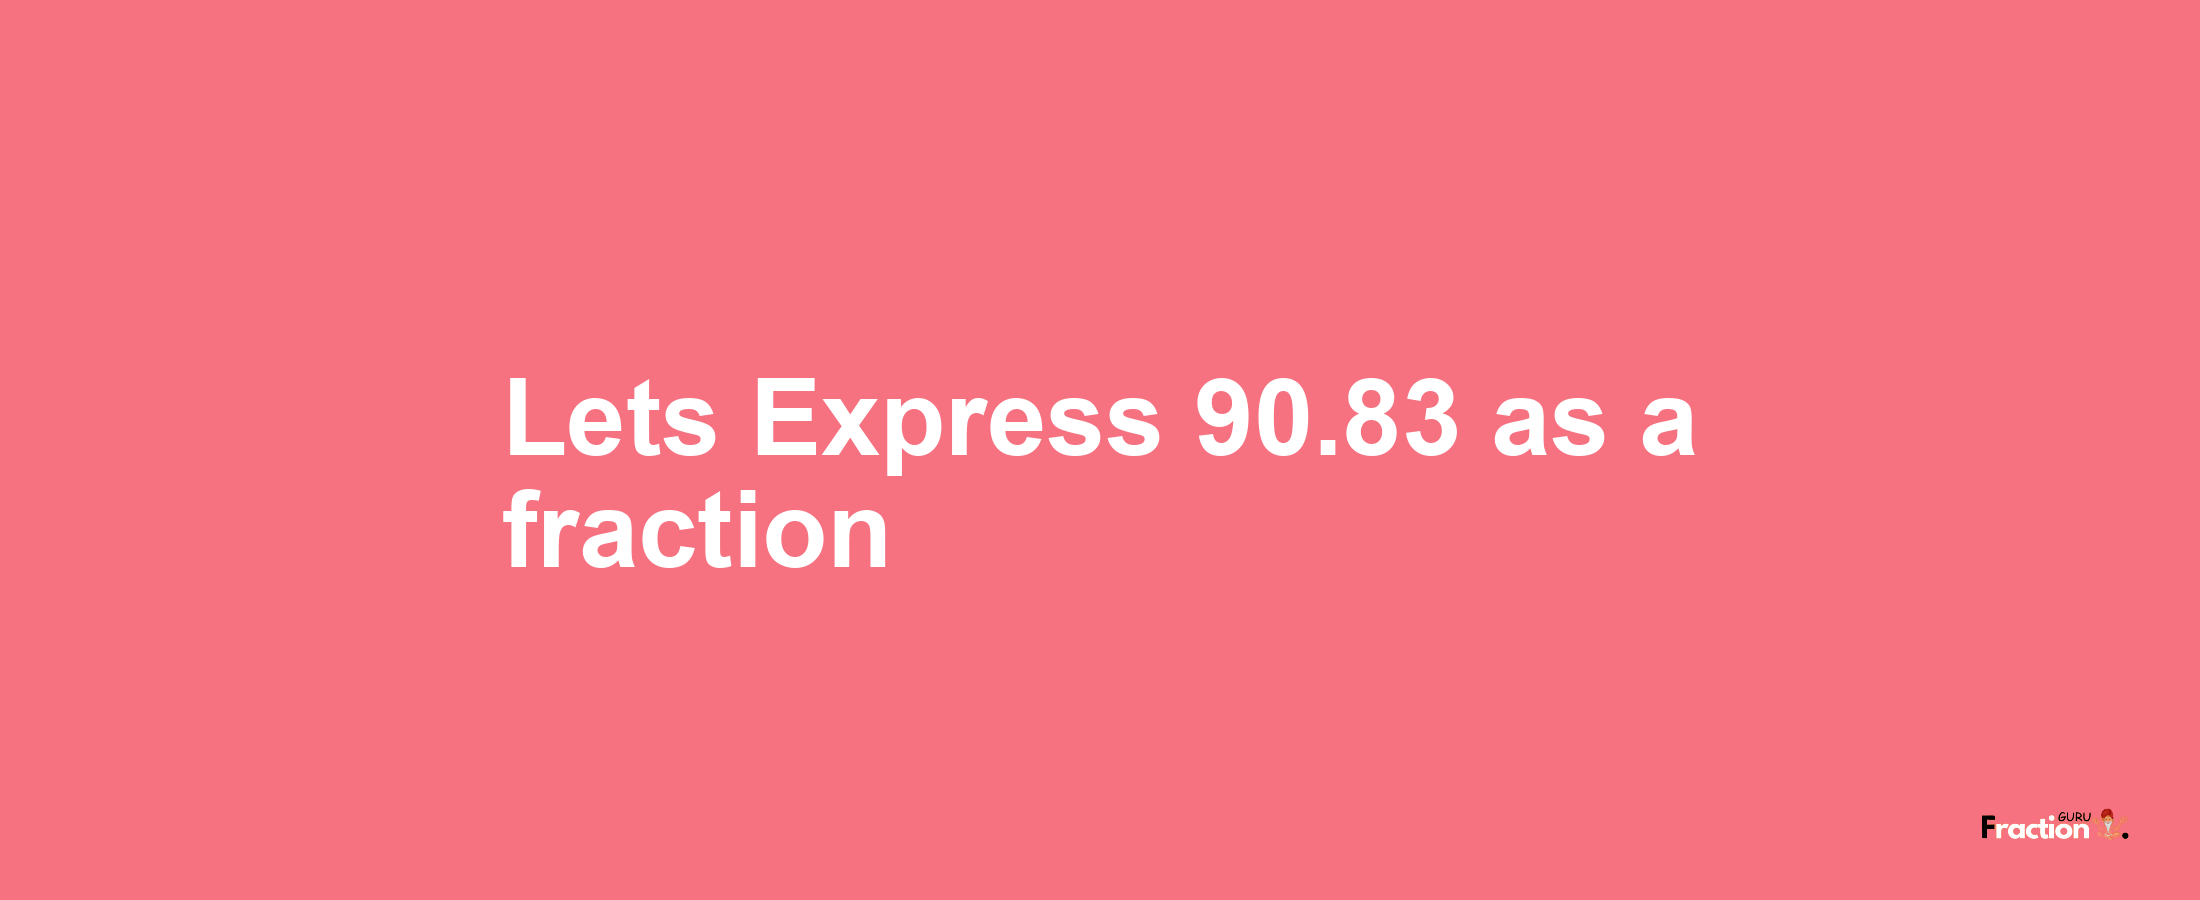 Lets Express 90.83 as afraction